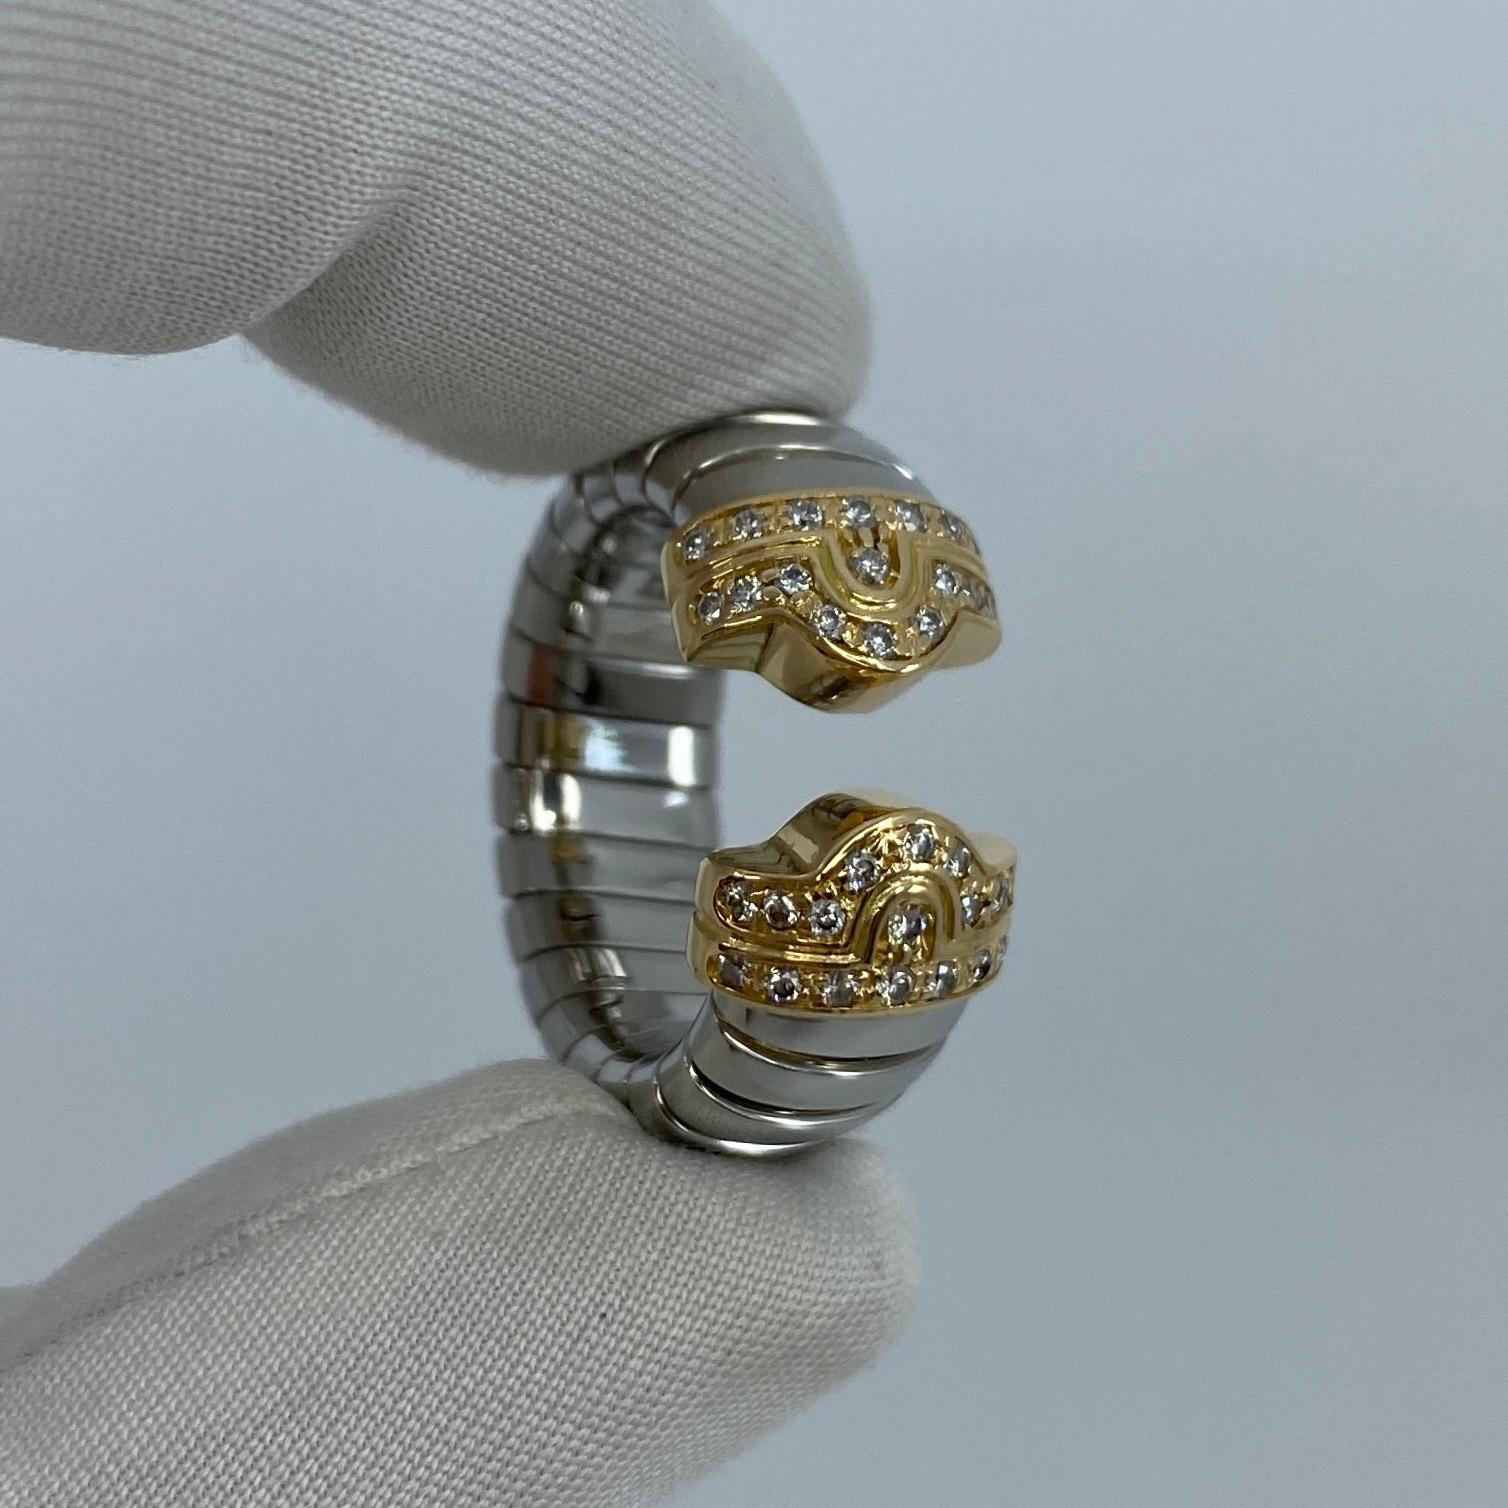 Vintage Bvlgari Diamond Parentesi 18 Karat Gold & Steel Spring Ring.

A beautiful 18k yellow gold and stainless steel Bvlgari Diamond Parentesi ring with flexible spring design.
This stylish and unique spring design allowing it to fit between L1/2